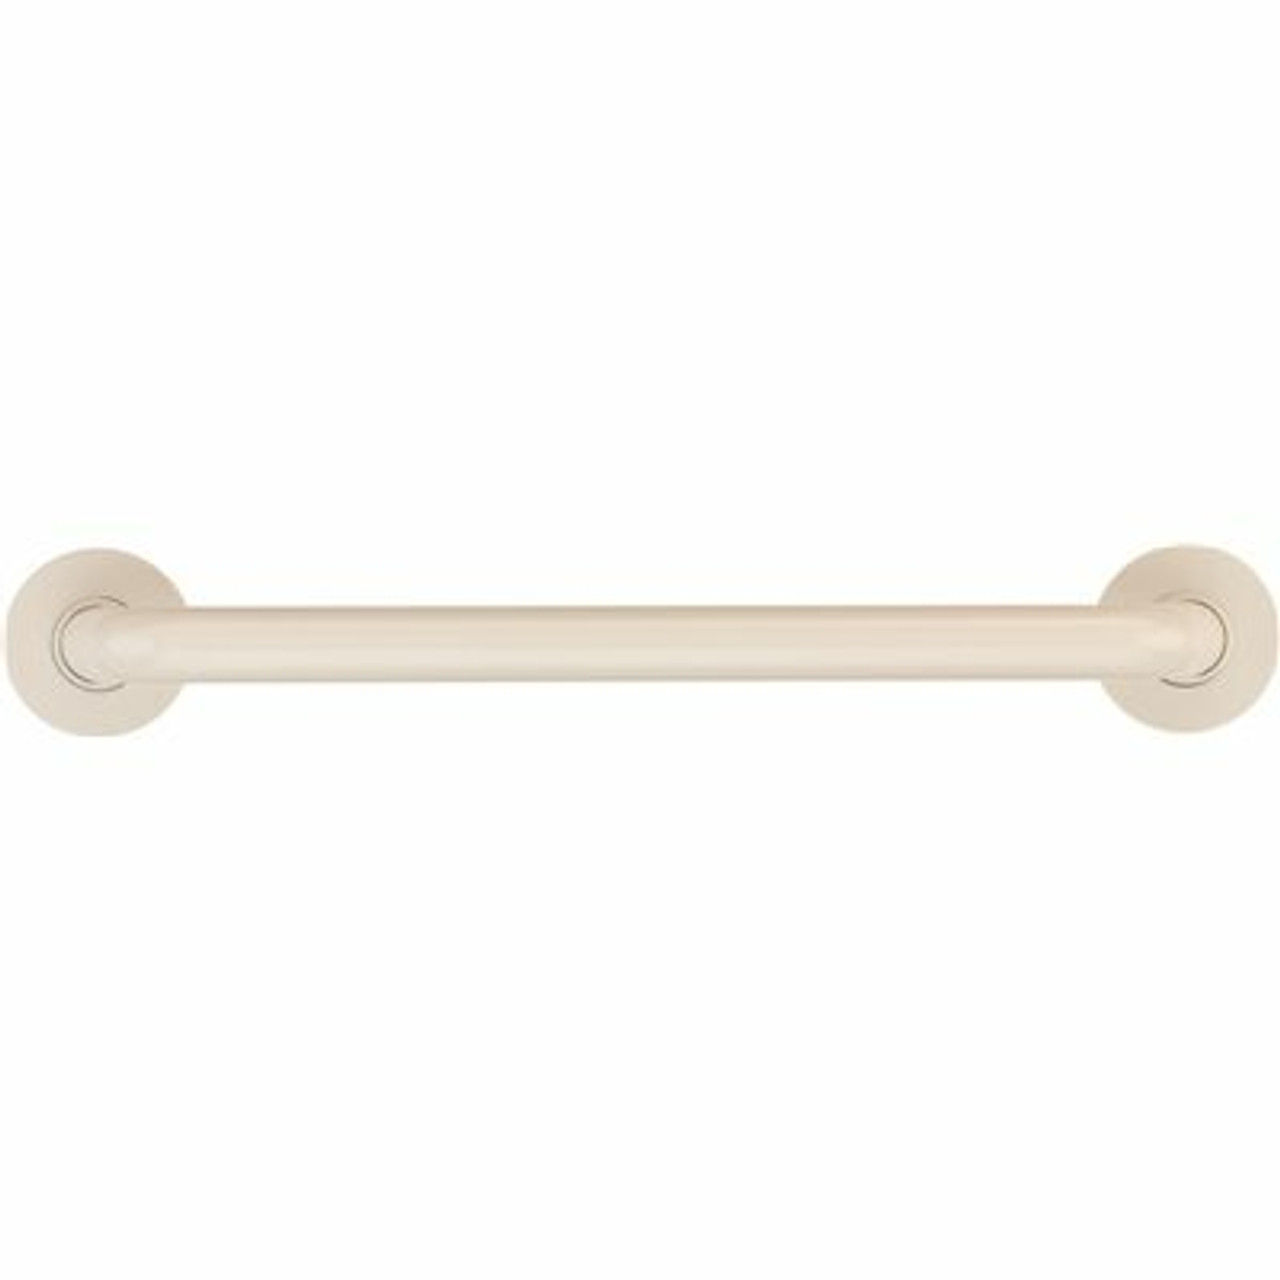 Ponte Giulio Usa 48 In. Contractor Antimicrobial Vinyl Coated Grab Bar In White